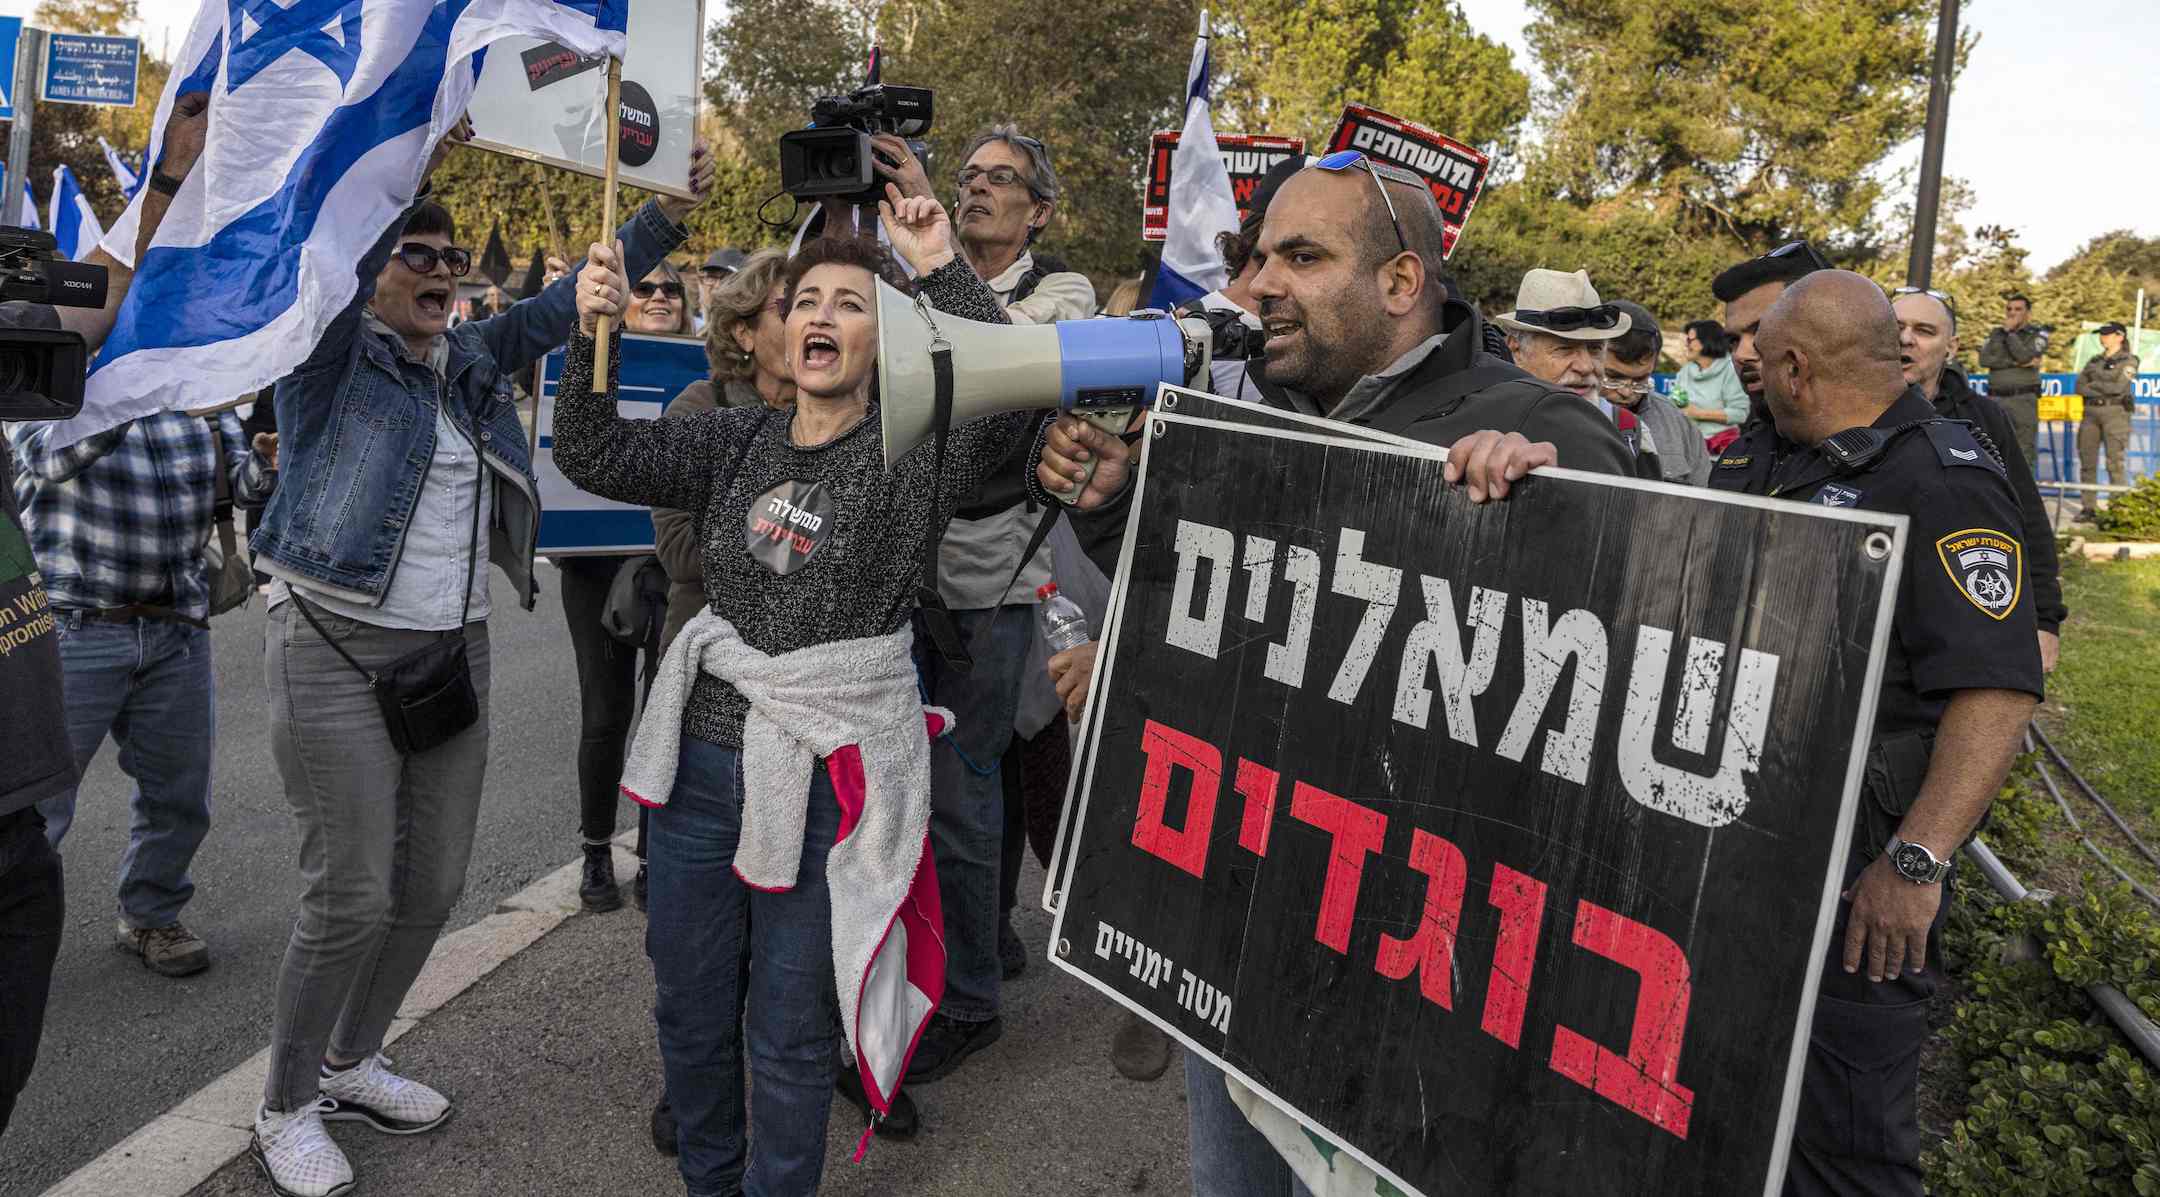 A right-wing activist, carrying a sign that reads “leftist traitors,” confronts left-wing activists at an anti-government demonstration near the Knesset in Jerusalem, Dec. 12, 2022. (MENAHEM KAHANA/AFP via Getty Images)